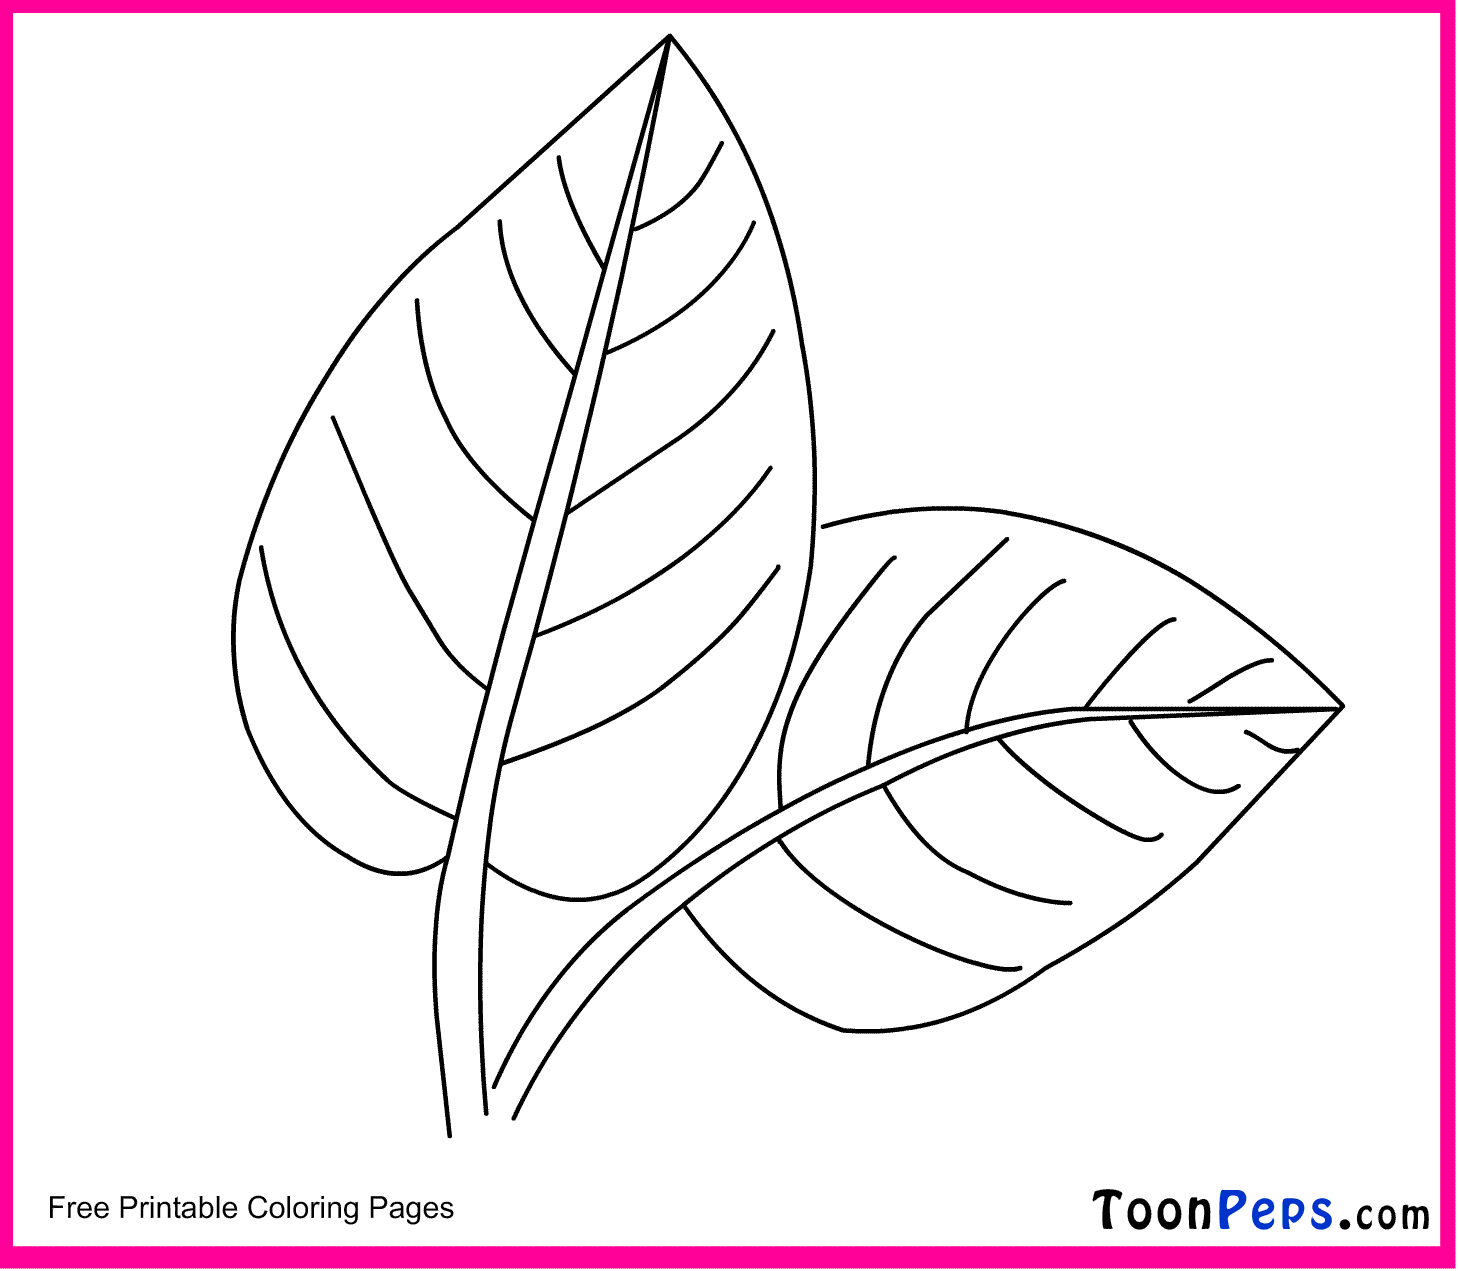 Leaf Coloring Pages For Kids